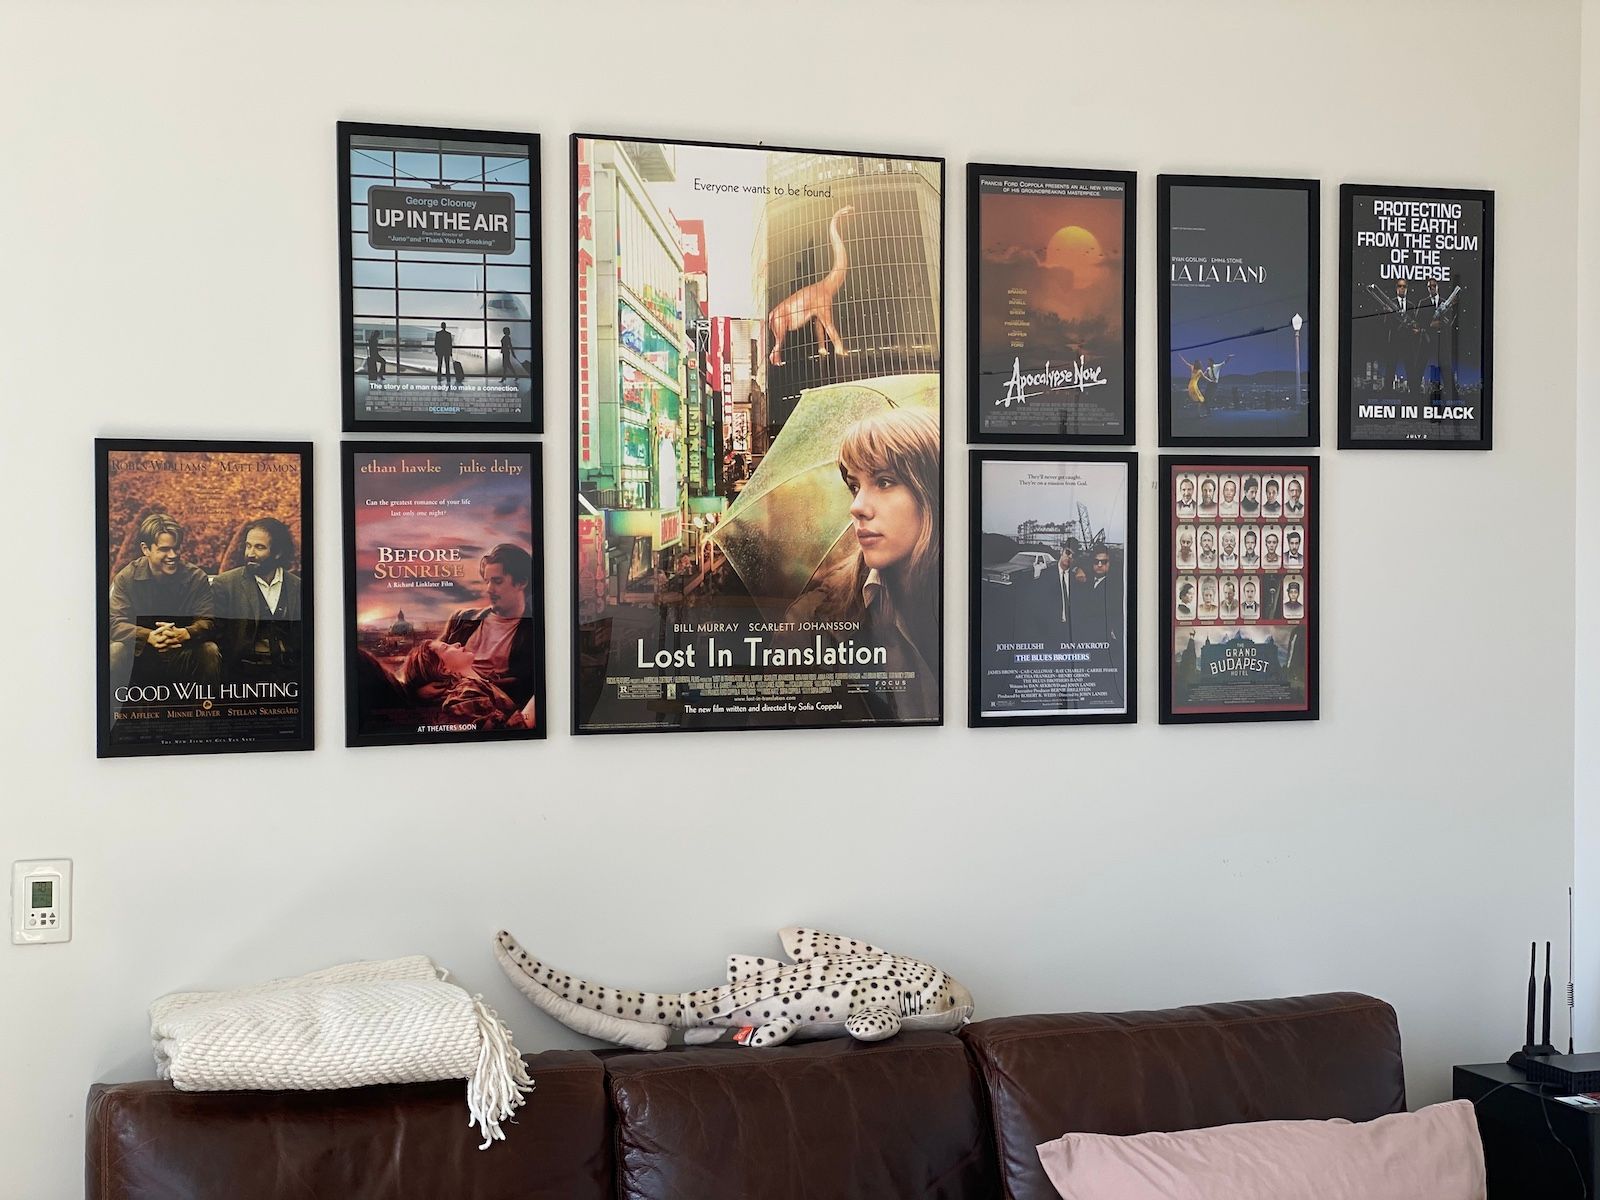 The wall behind my couch with 9 movie posters: Good Will Hunting, Before Sunrise, Up in the Air, Lost in Translation, Apocalypse Now, The Blues Brothers, Grand Budapest Hotel, La La Land, and Men in Black.